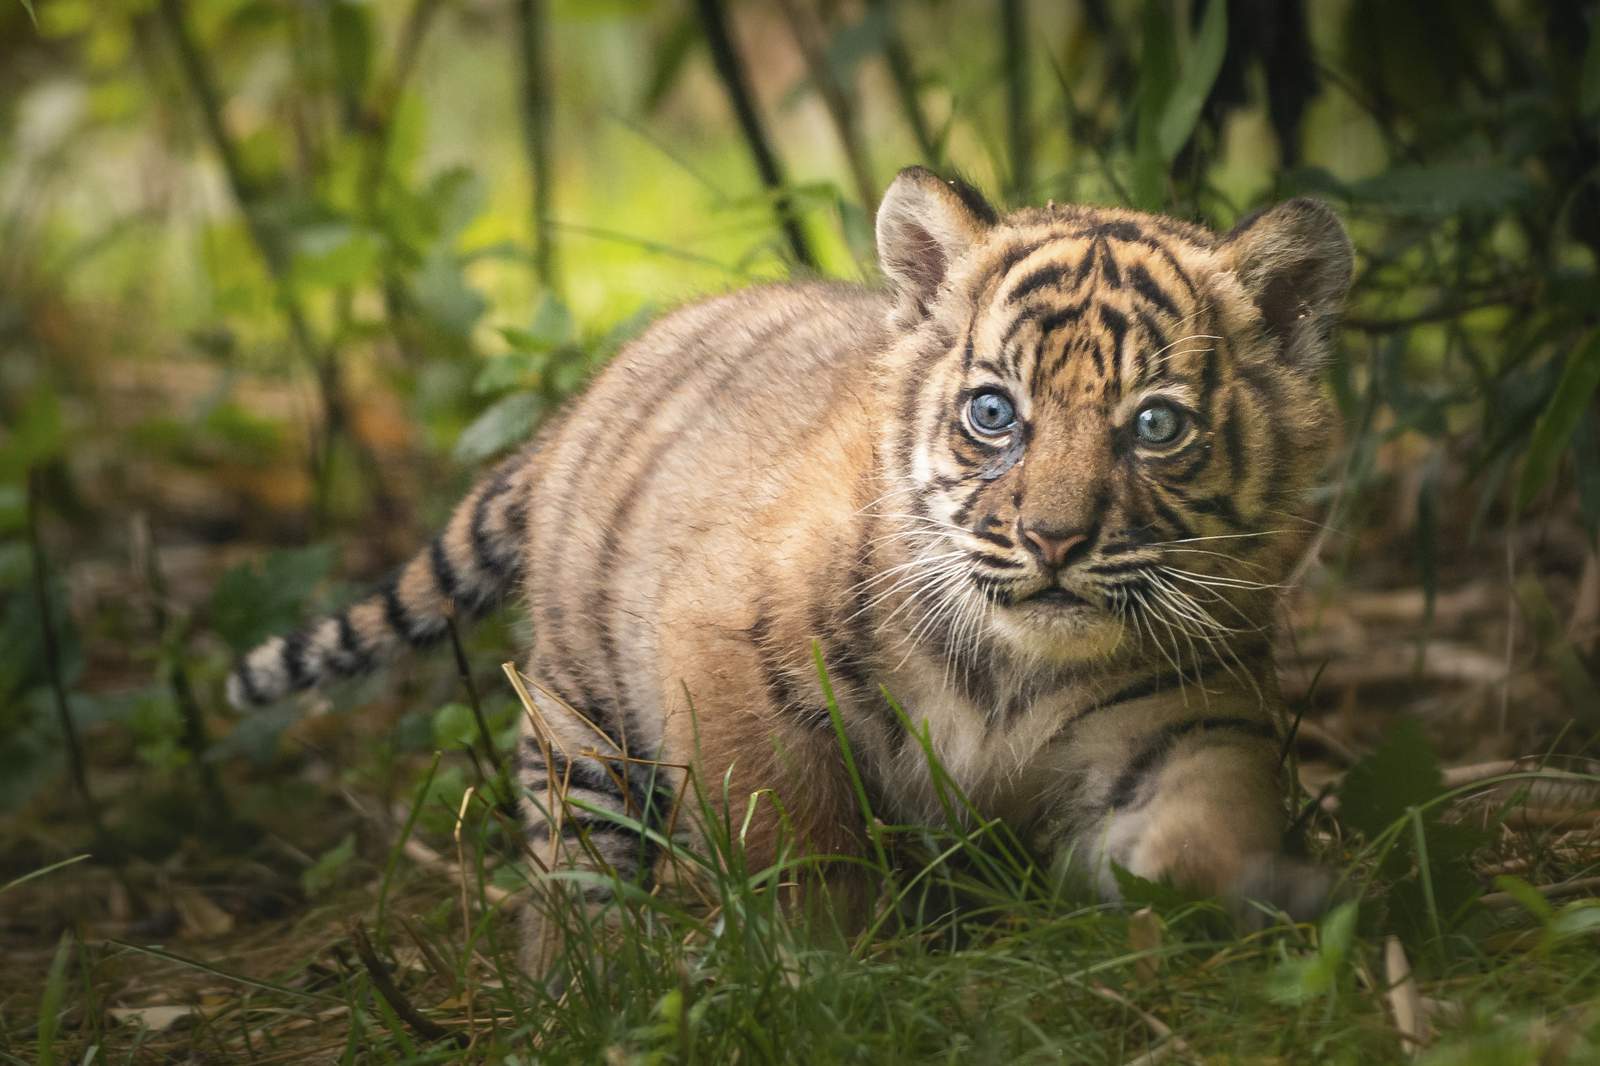 Sumatran tiger cub learns to hunt from mother at Poland zoo